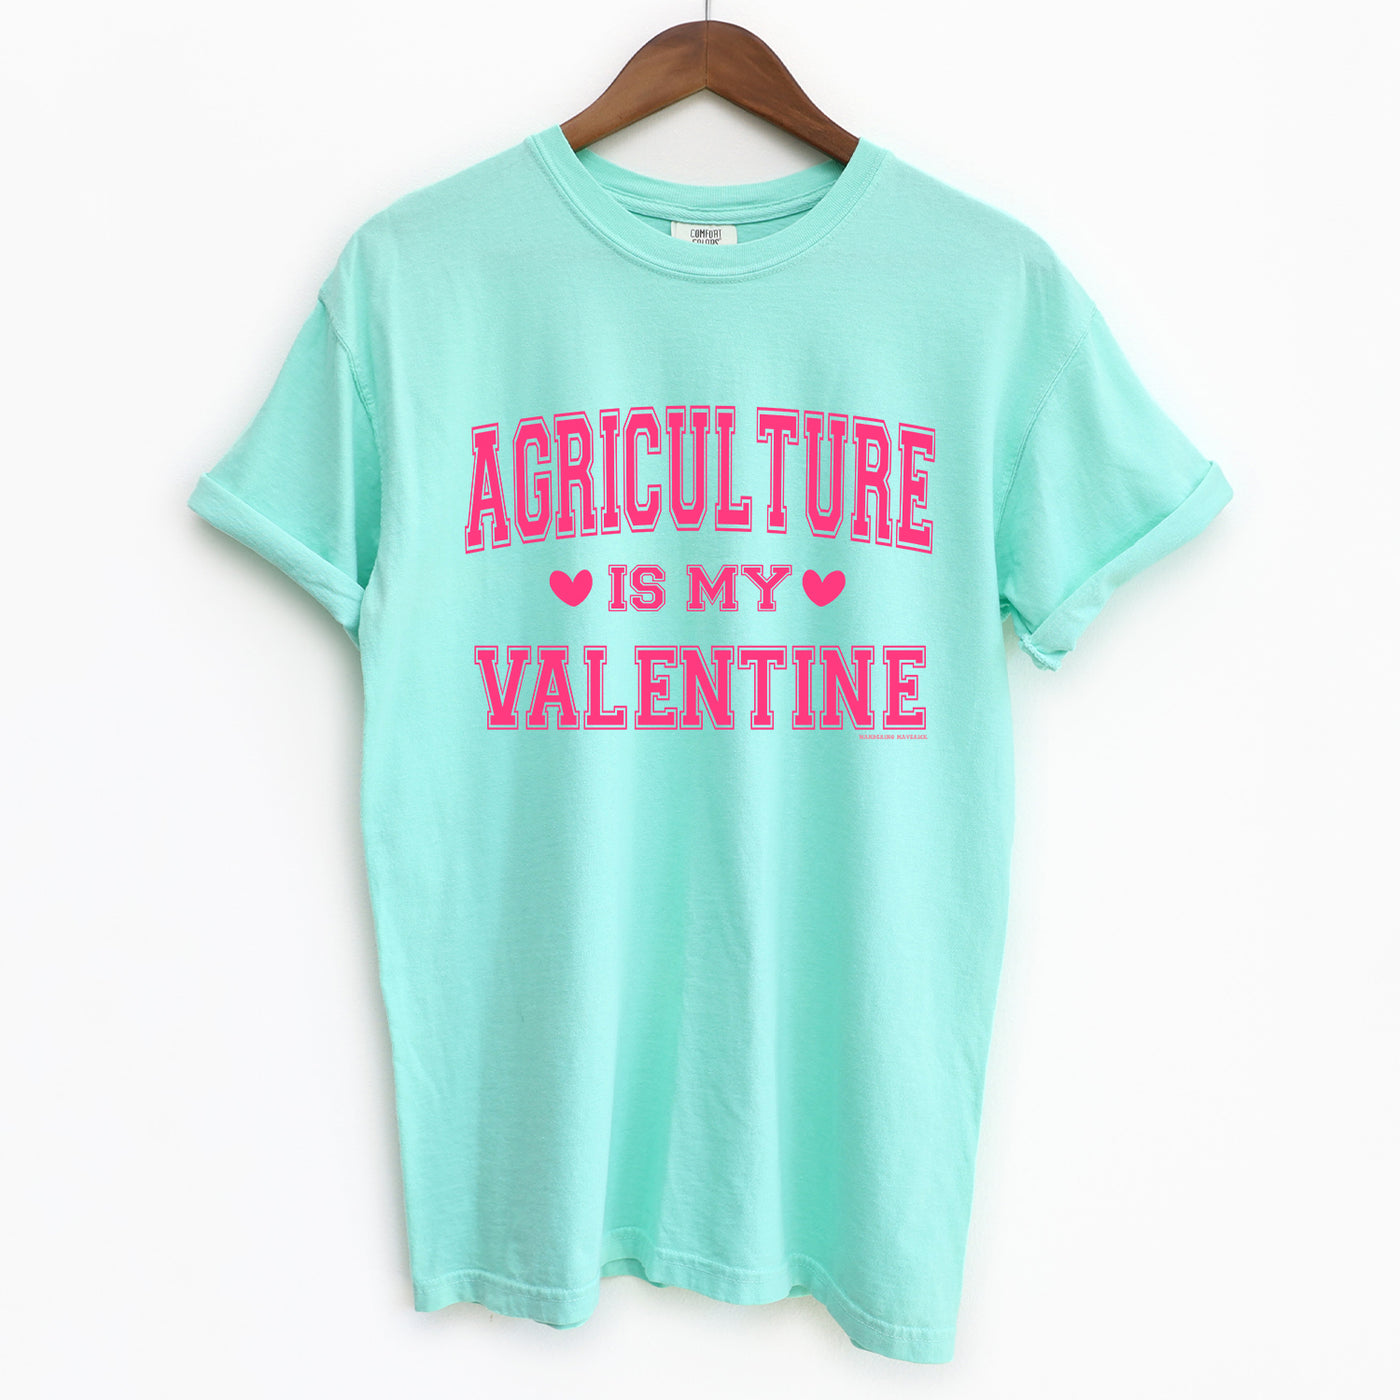 Agriculture is my valentine Pink Ink ComfortWash/ComfortColor T-Shirt (S-4XL) - Multiple Colors!